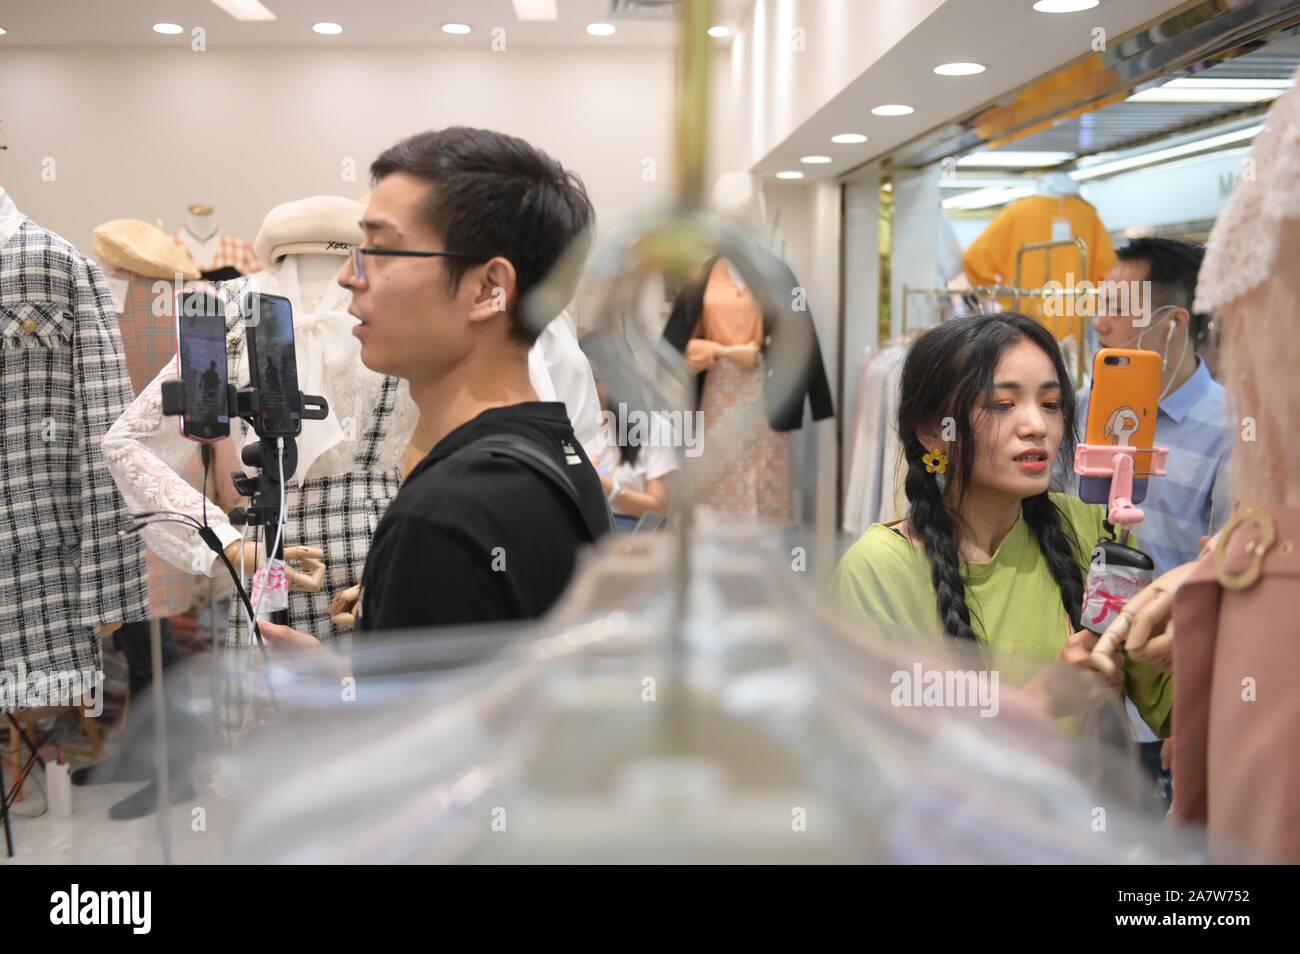 Online celebrities live-stream at the wholesale market in Guangzhou city, south China's Guangdong province, 29 August 2019.   Live-streaming at wholes Stock Photo